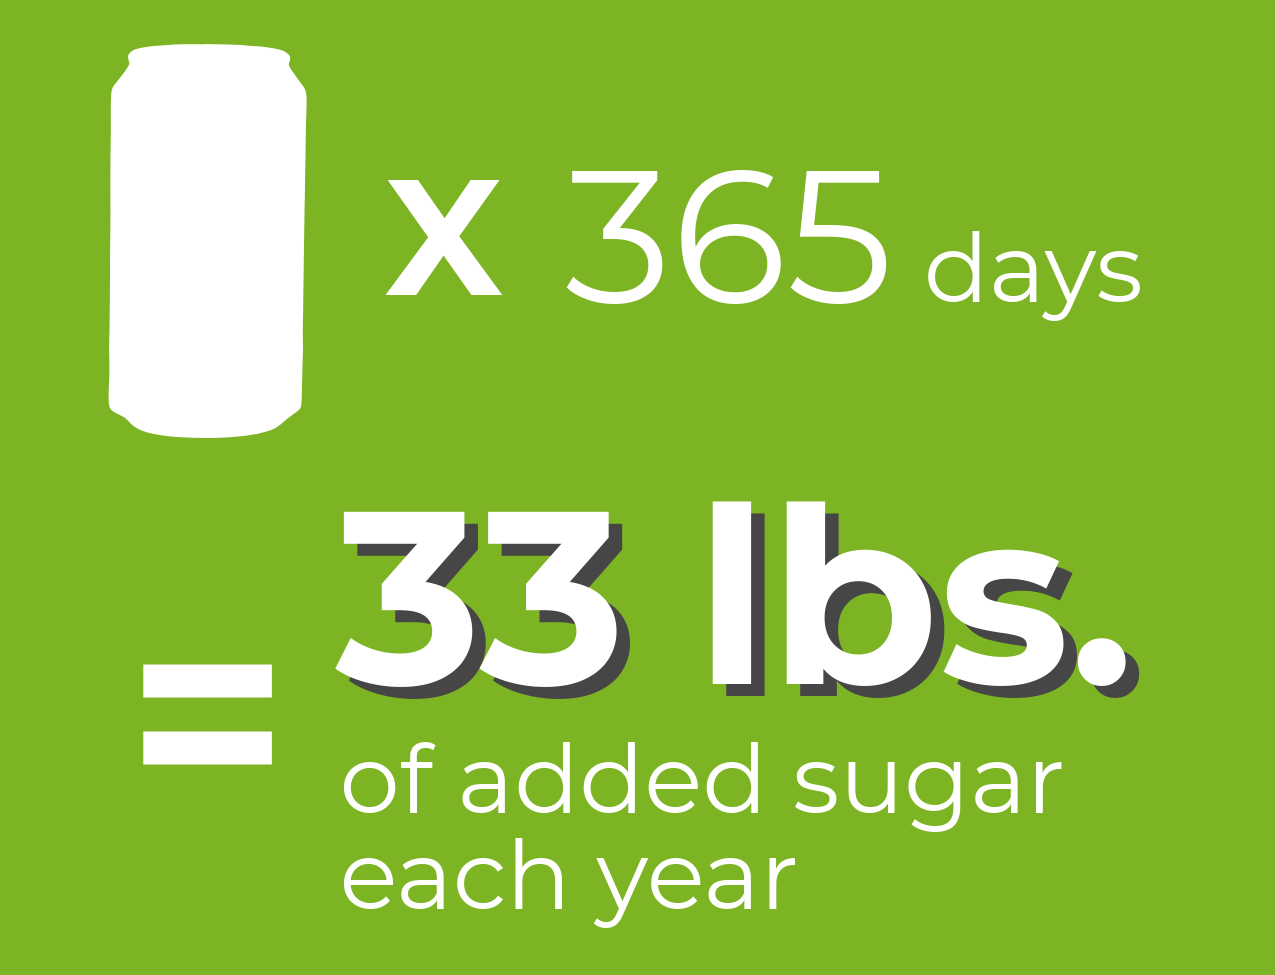 33 pounds of sugar each year if you drink a 12 ounce soda every day for a year